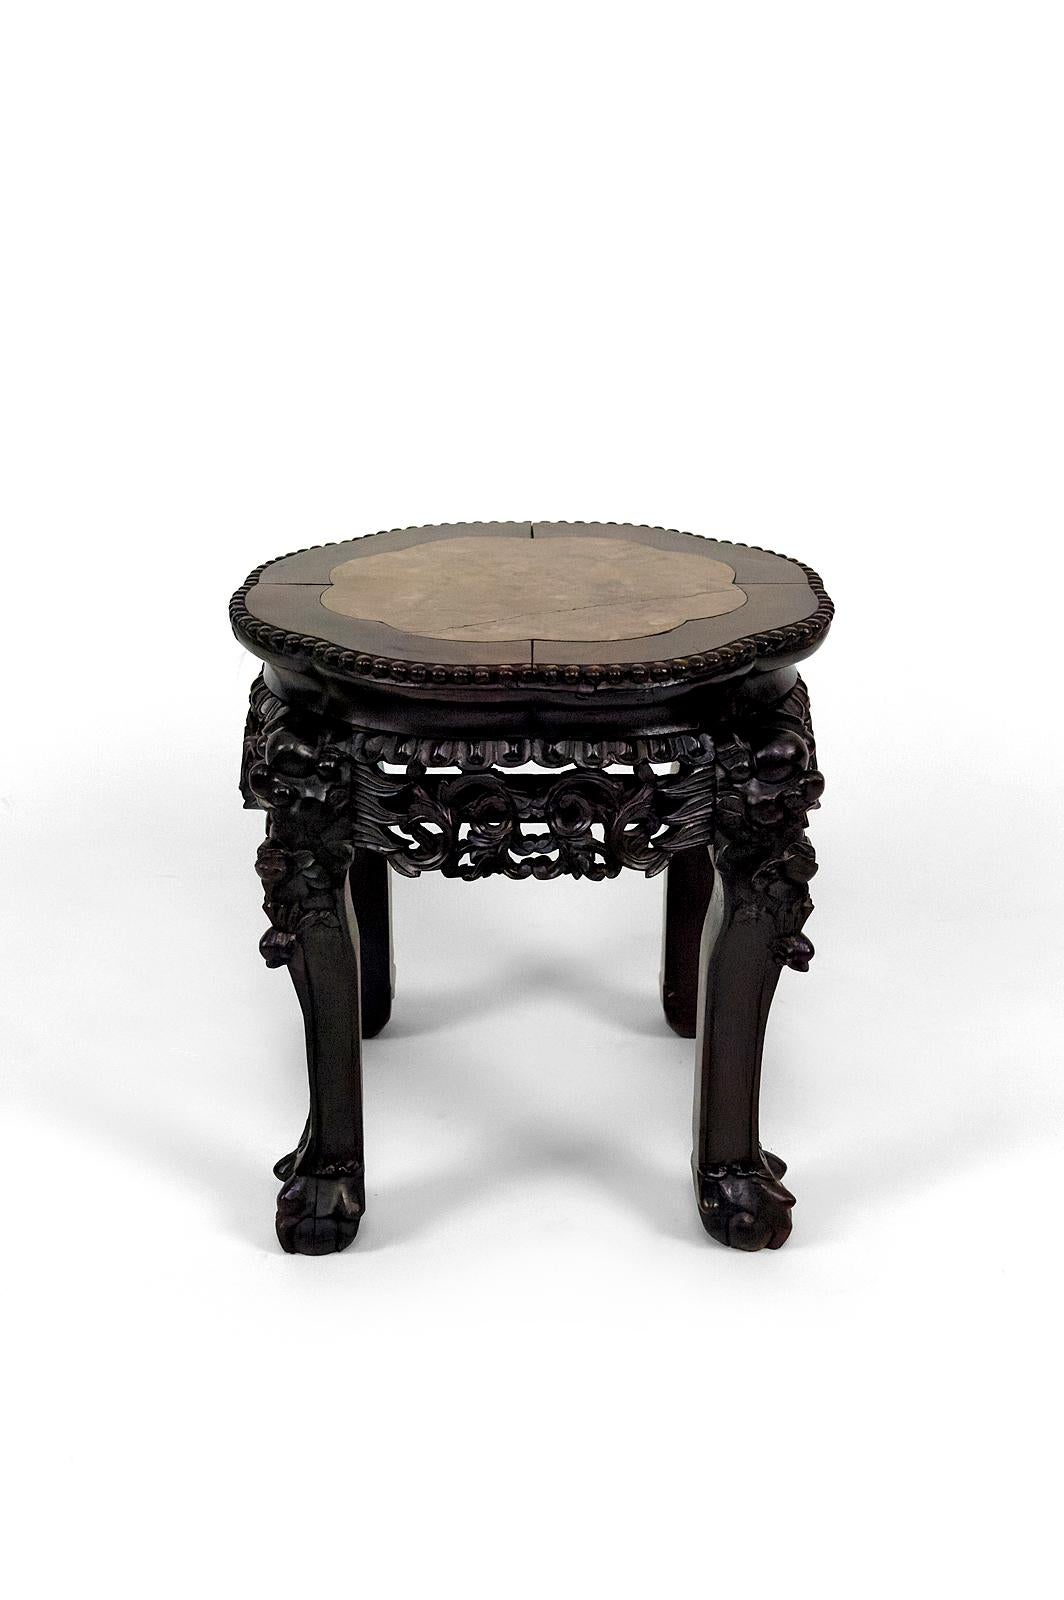 Superb low side table / gueridon / pedestal table / plant holder / pot holder / pedestal in carved solid wood.

The sculptures feature dragon/demon heads, tiger/lion paws and plant motifs.
Marble top.

Asia, South China or former French Indochina